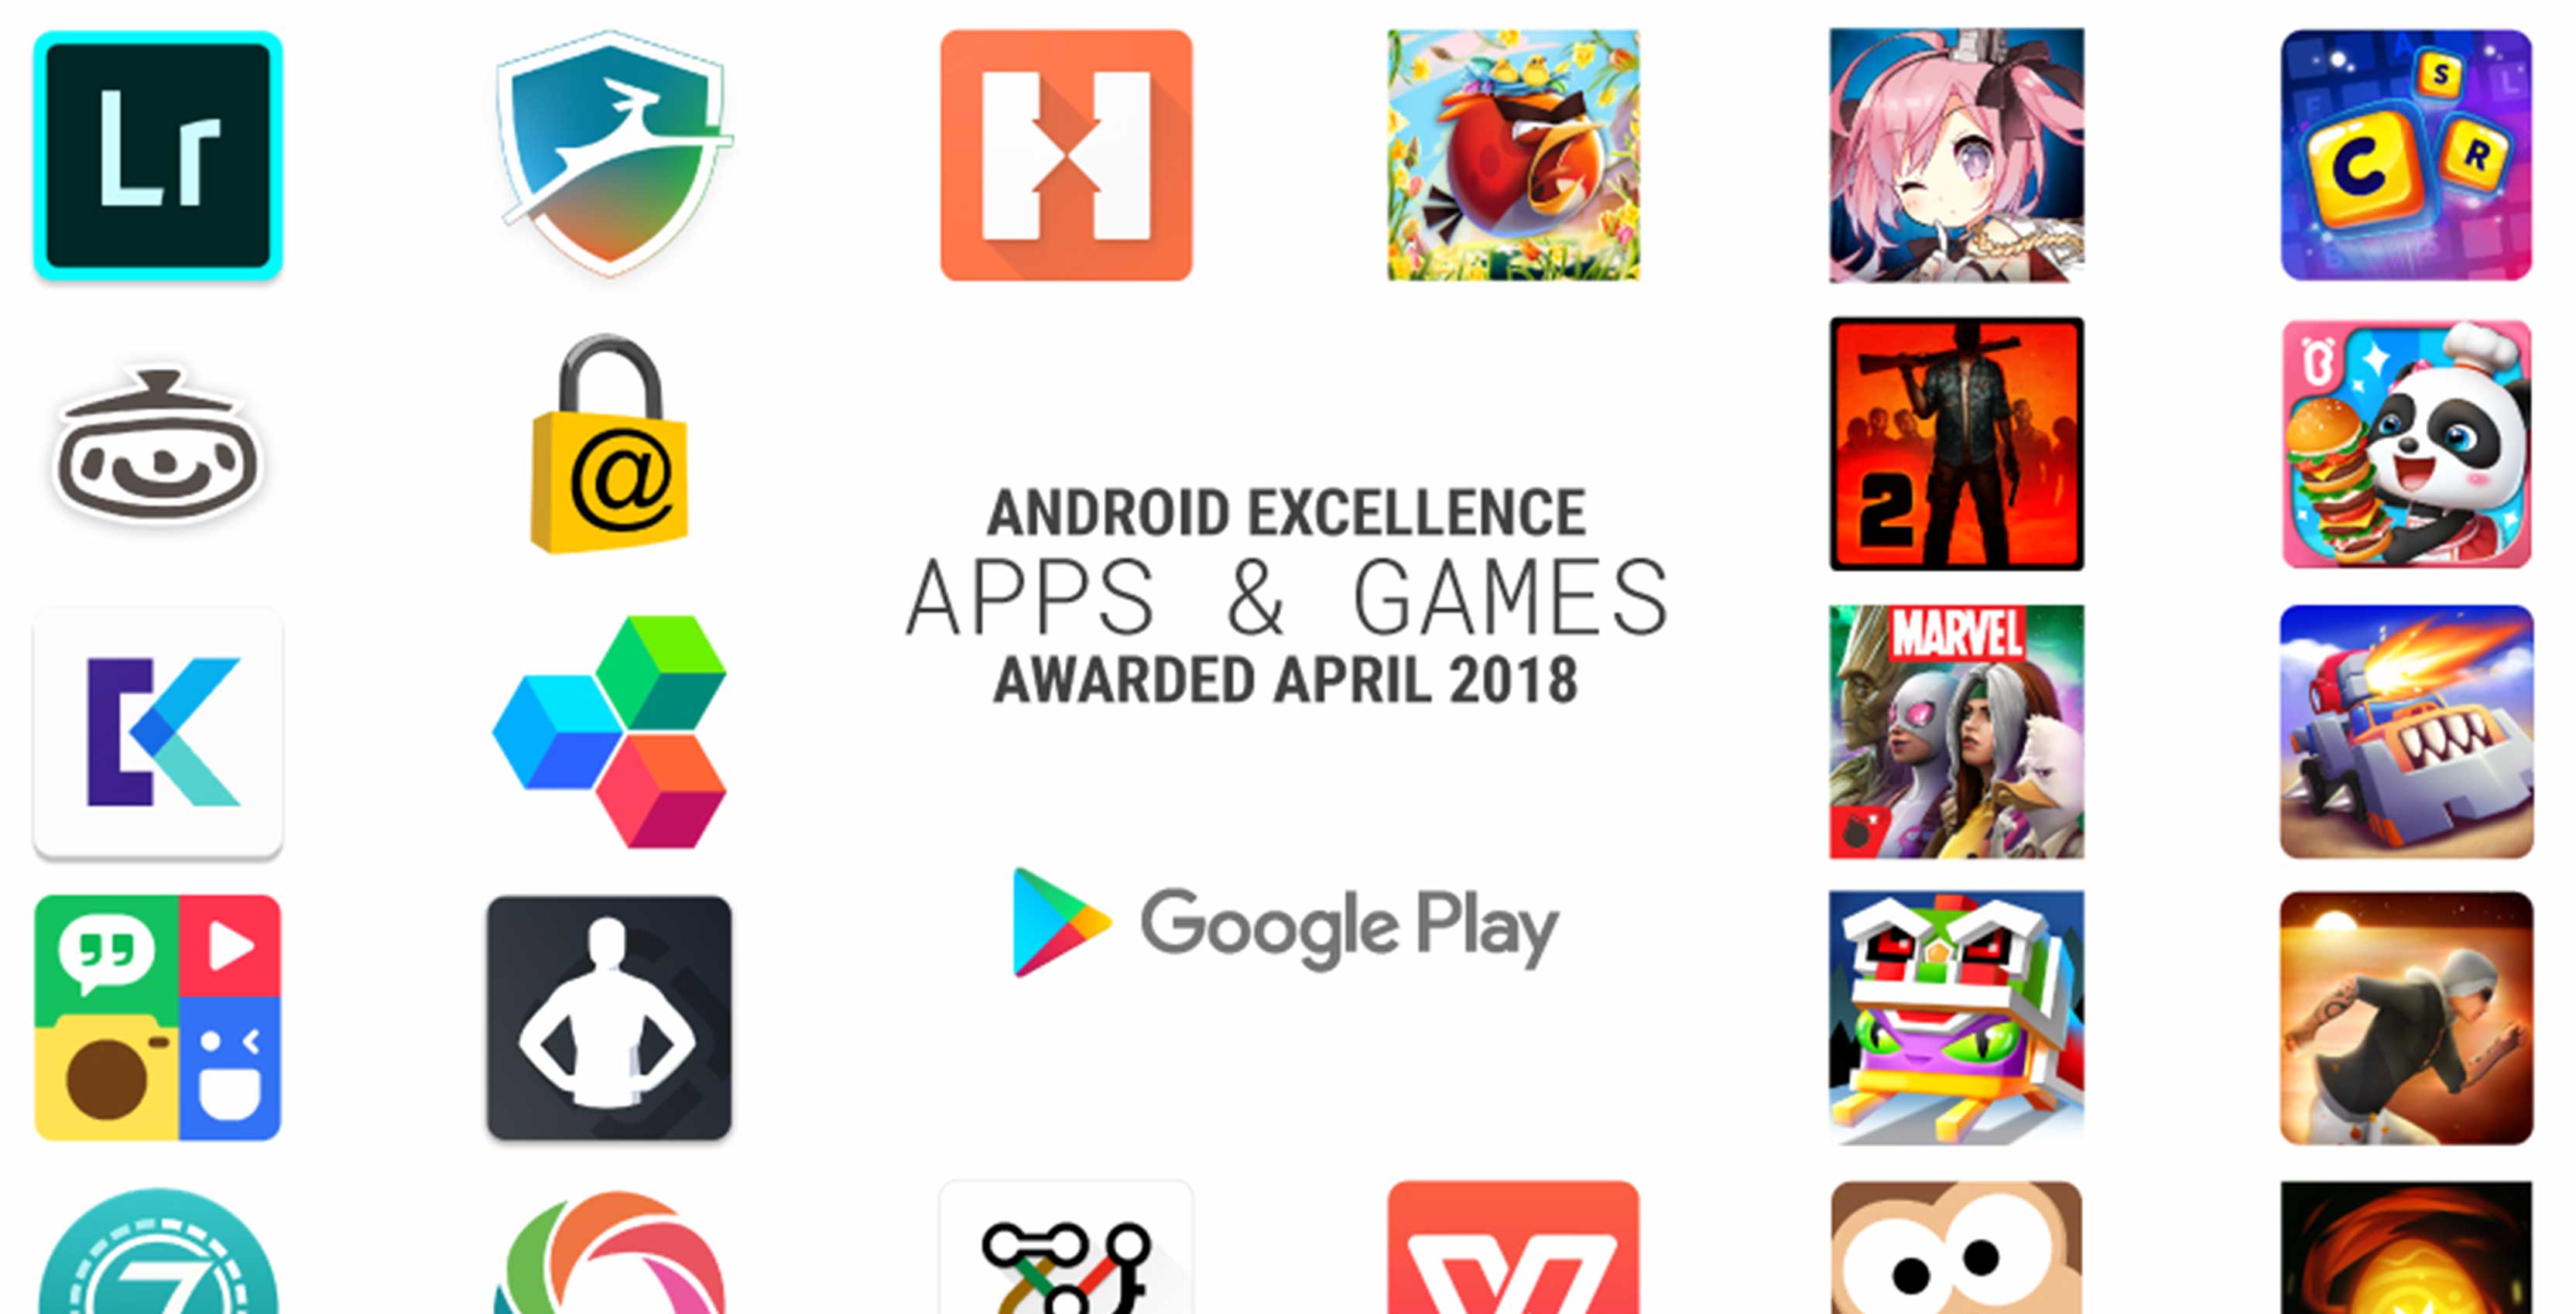 Android Excellence apps